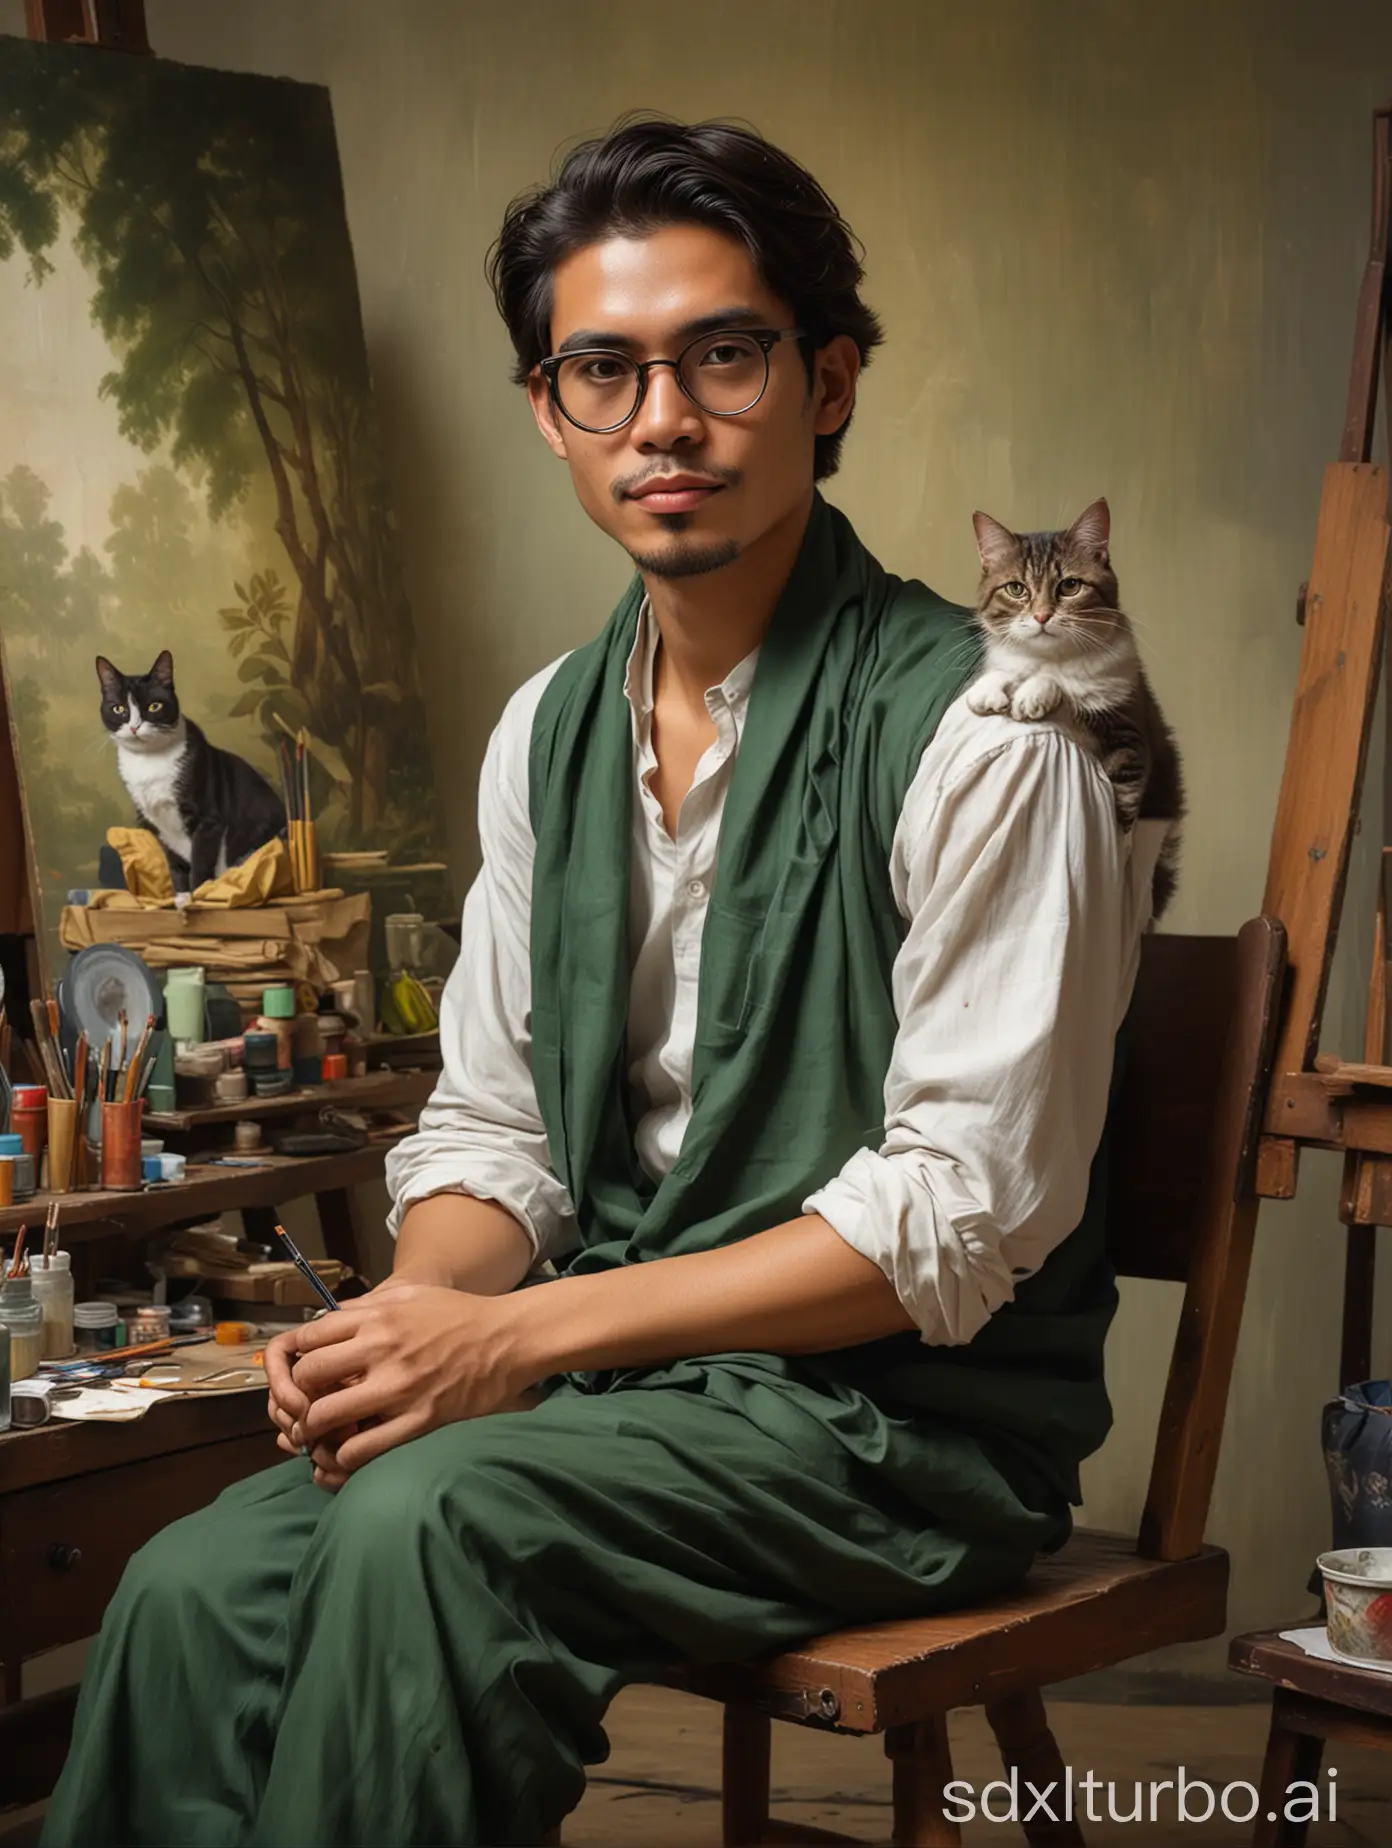 A full-body shot of a naturalist painter, of Java-thailand descent guy with shoulder-length dark brown hair, wearing round eyeglasses, in a traditional painter costume, sitting on a chair, with a background of a classic painting studio full of art supplies. A cat pet wearing a green scarf is sitting next to him. in the style of oil painting.